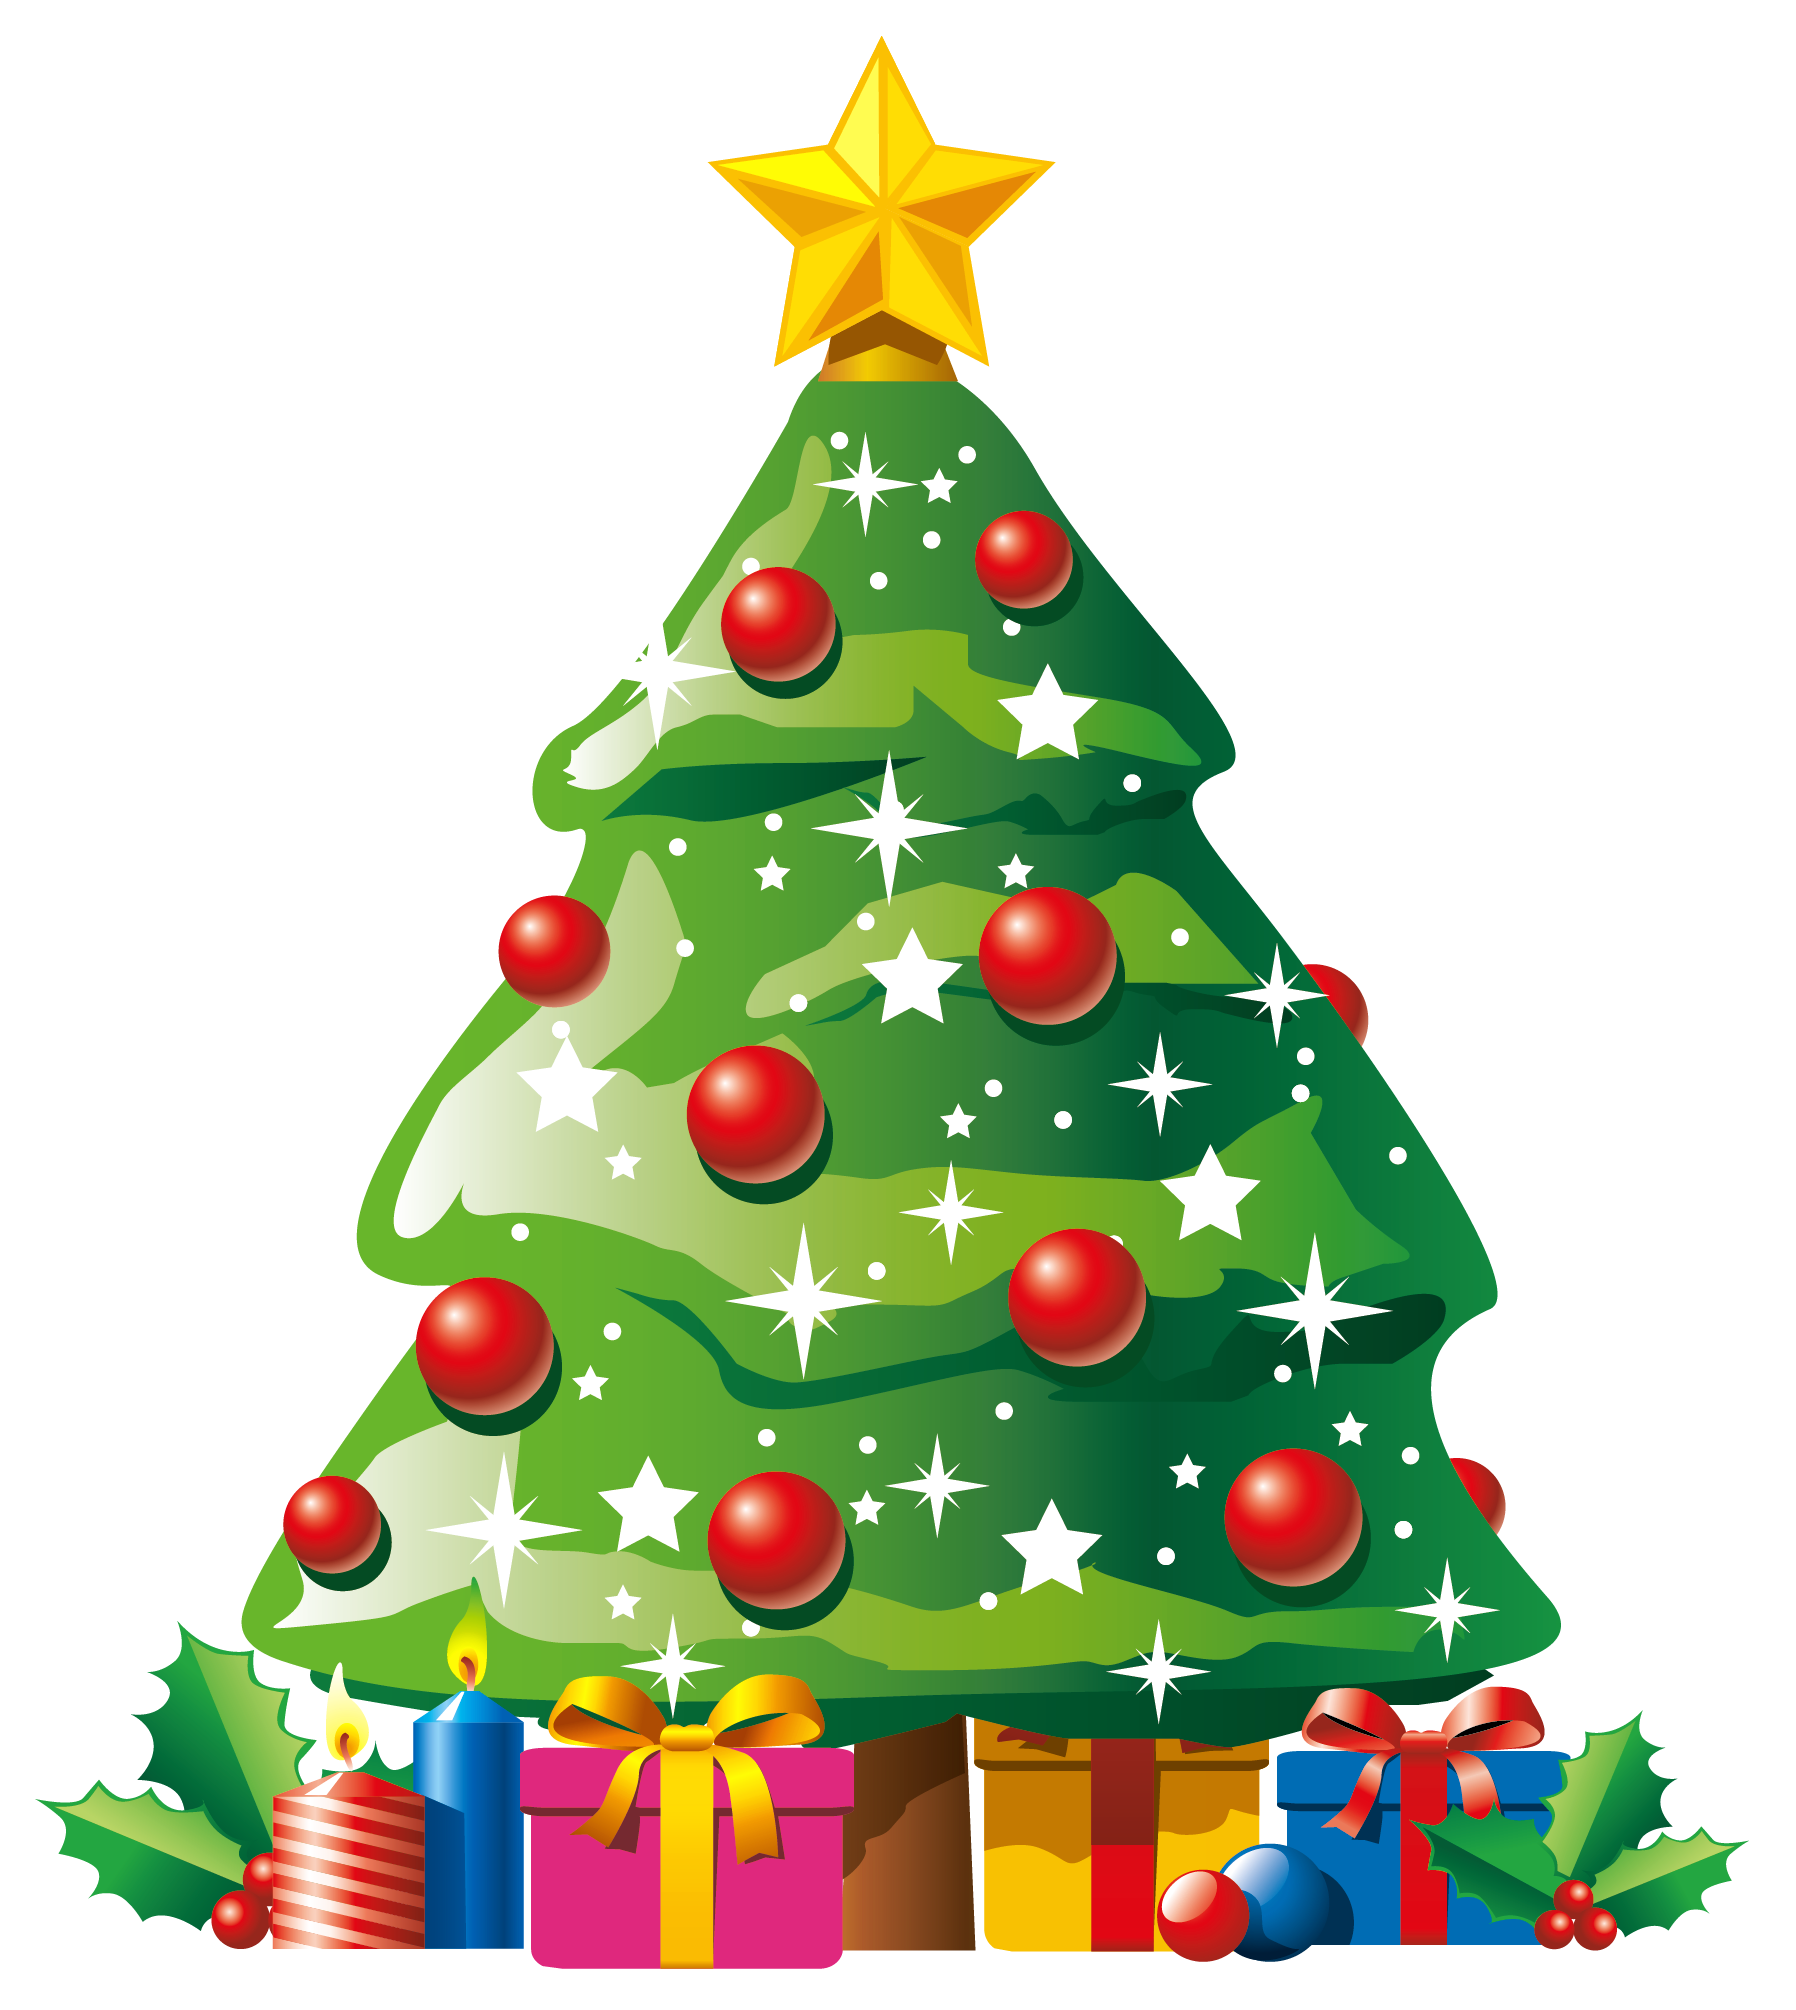 Christmas Tree Image Clipart - ClipArt Best